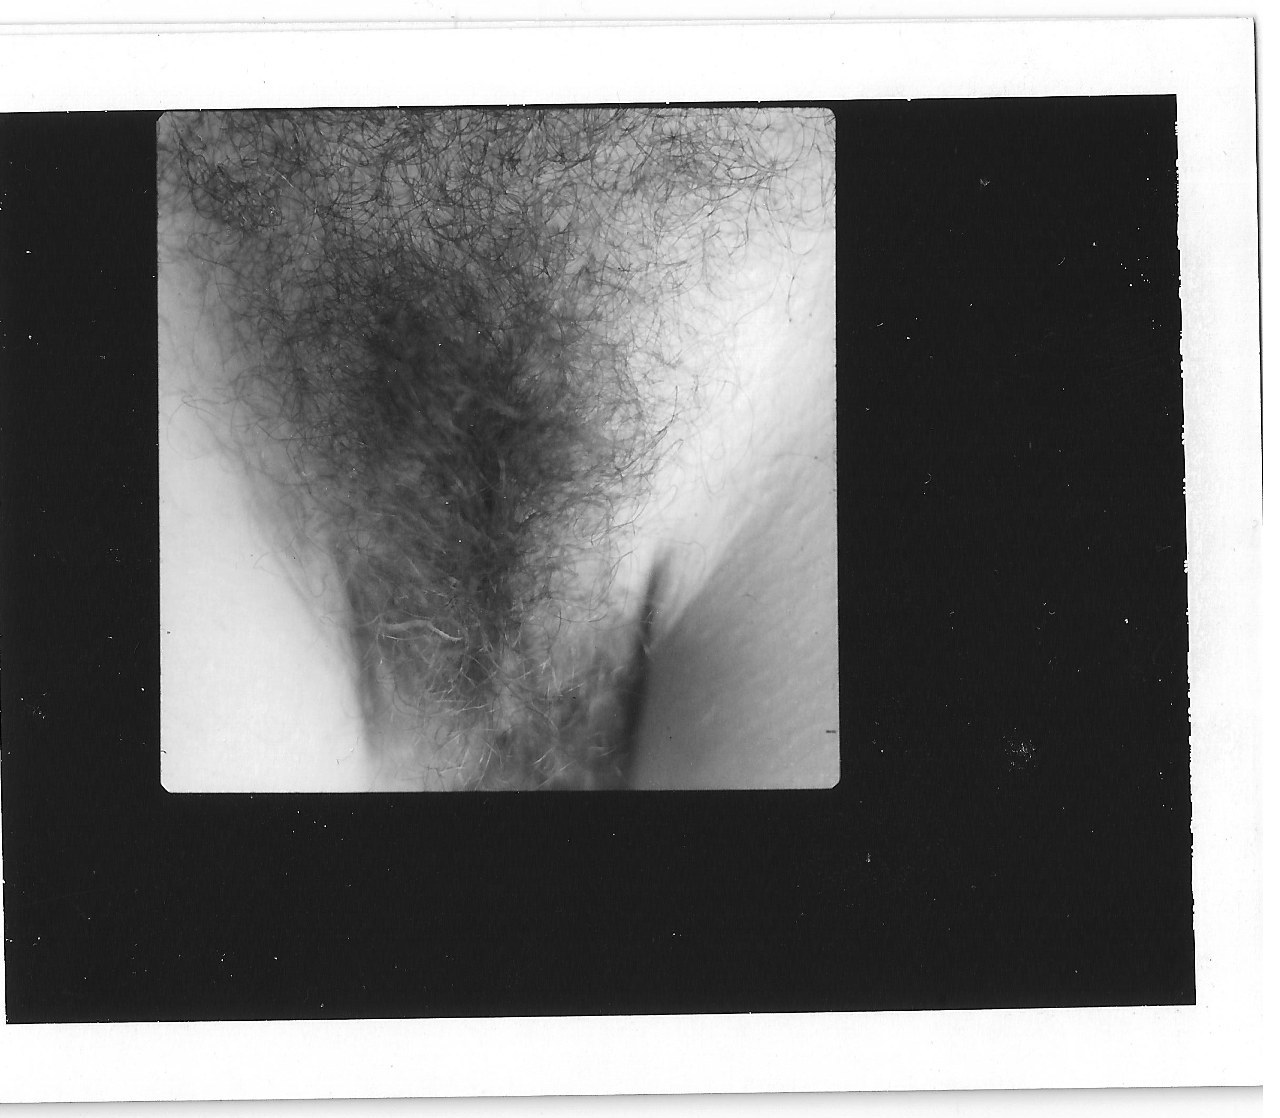 Daniel Bauer Vintage-Polaroids for sale.This  one was taken with the Hasselblad with